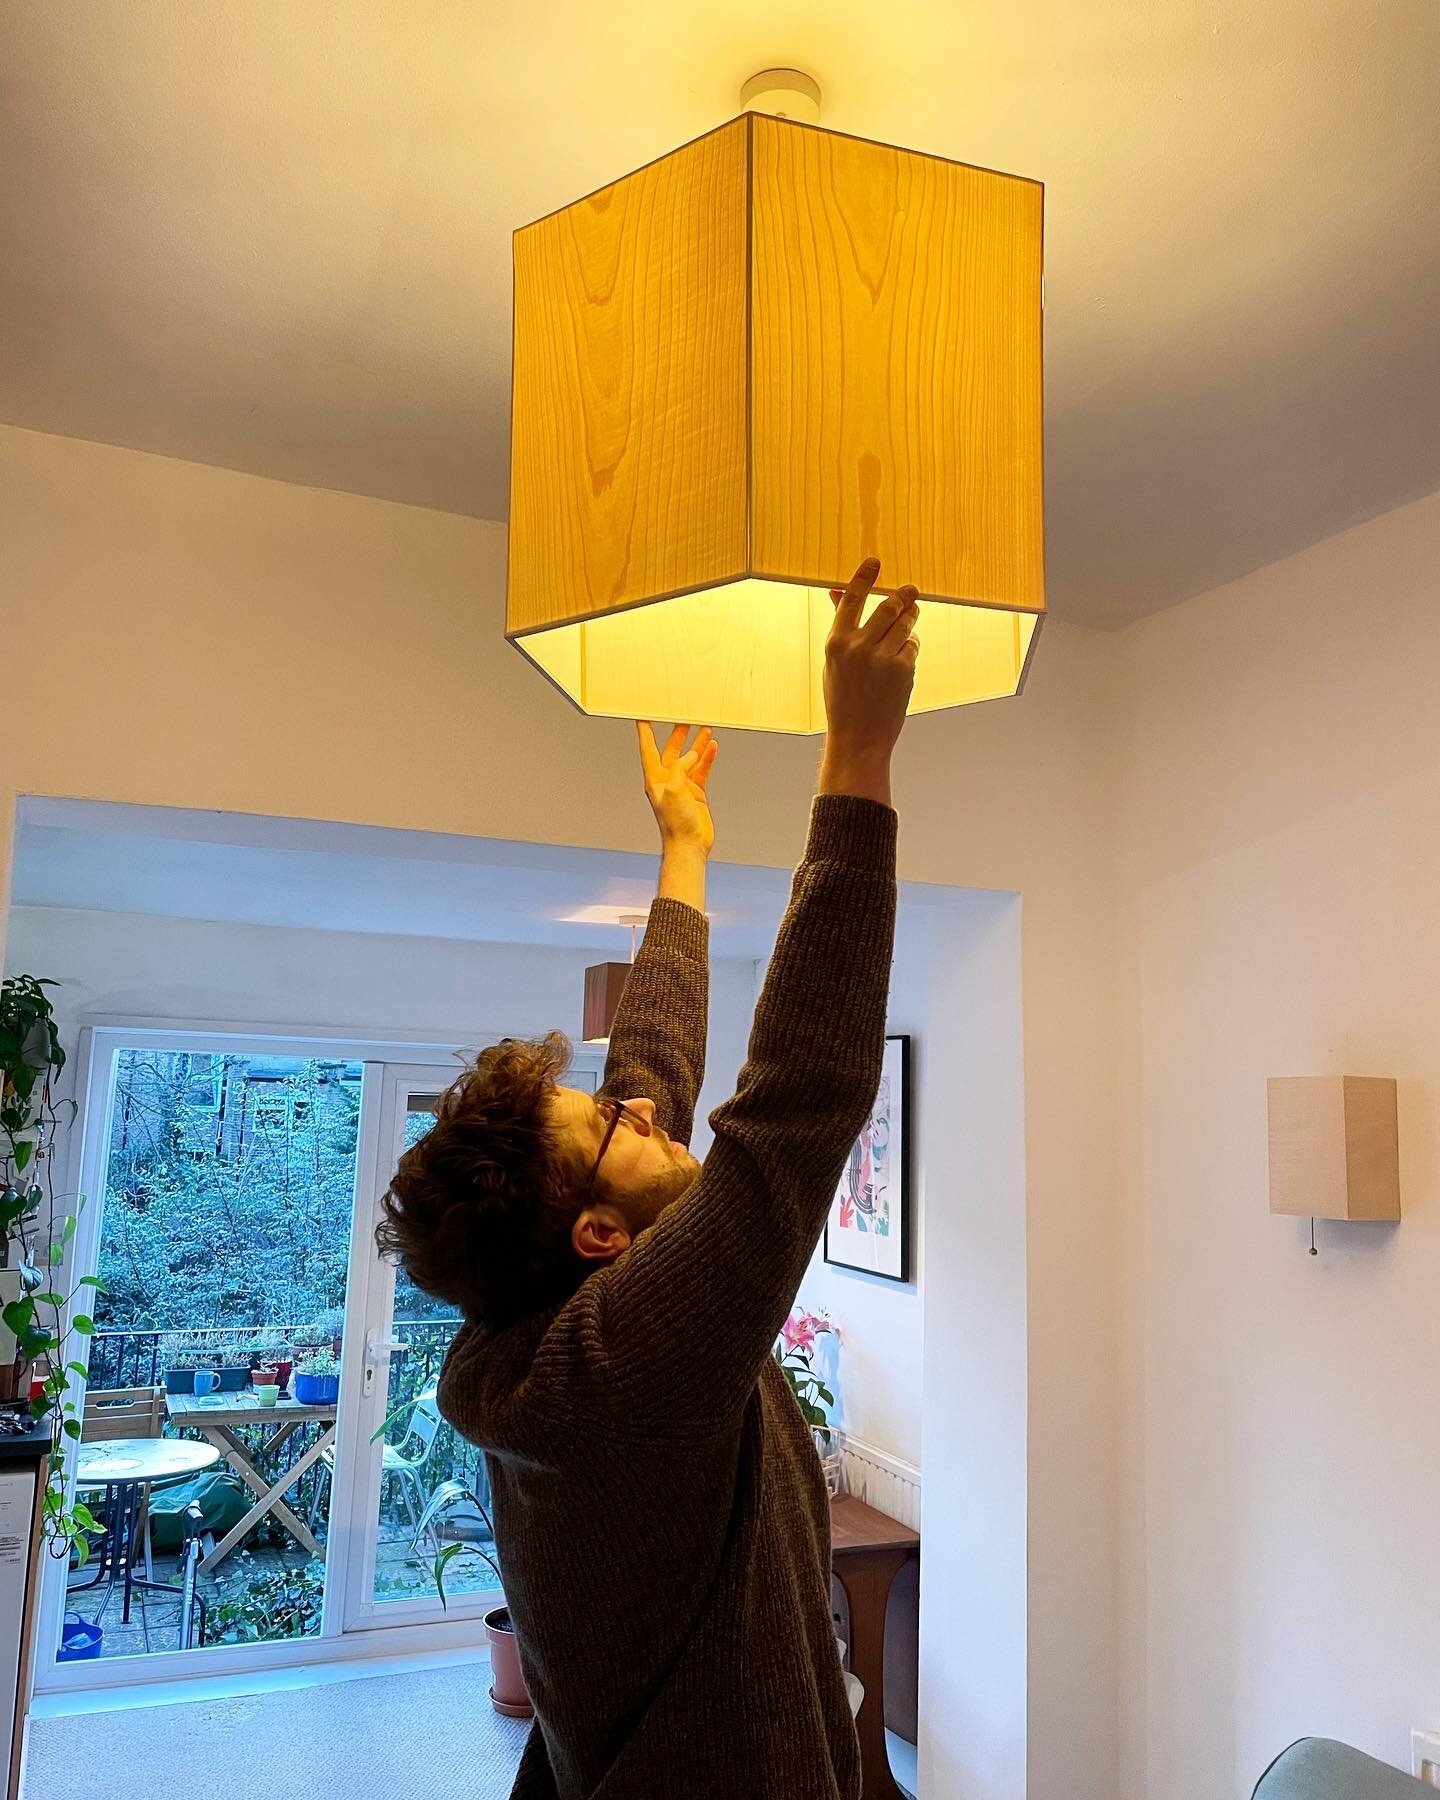 Finished fitting the sycamore veneer panels to my tulip wood light shade frame. 

Testing out what the shade will look like once I have the bulb holder to keep it suspended. Pleased with the results!